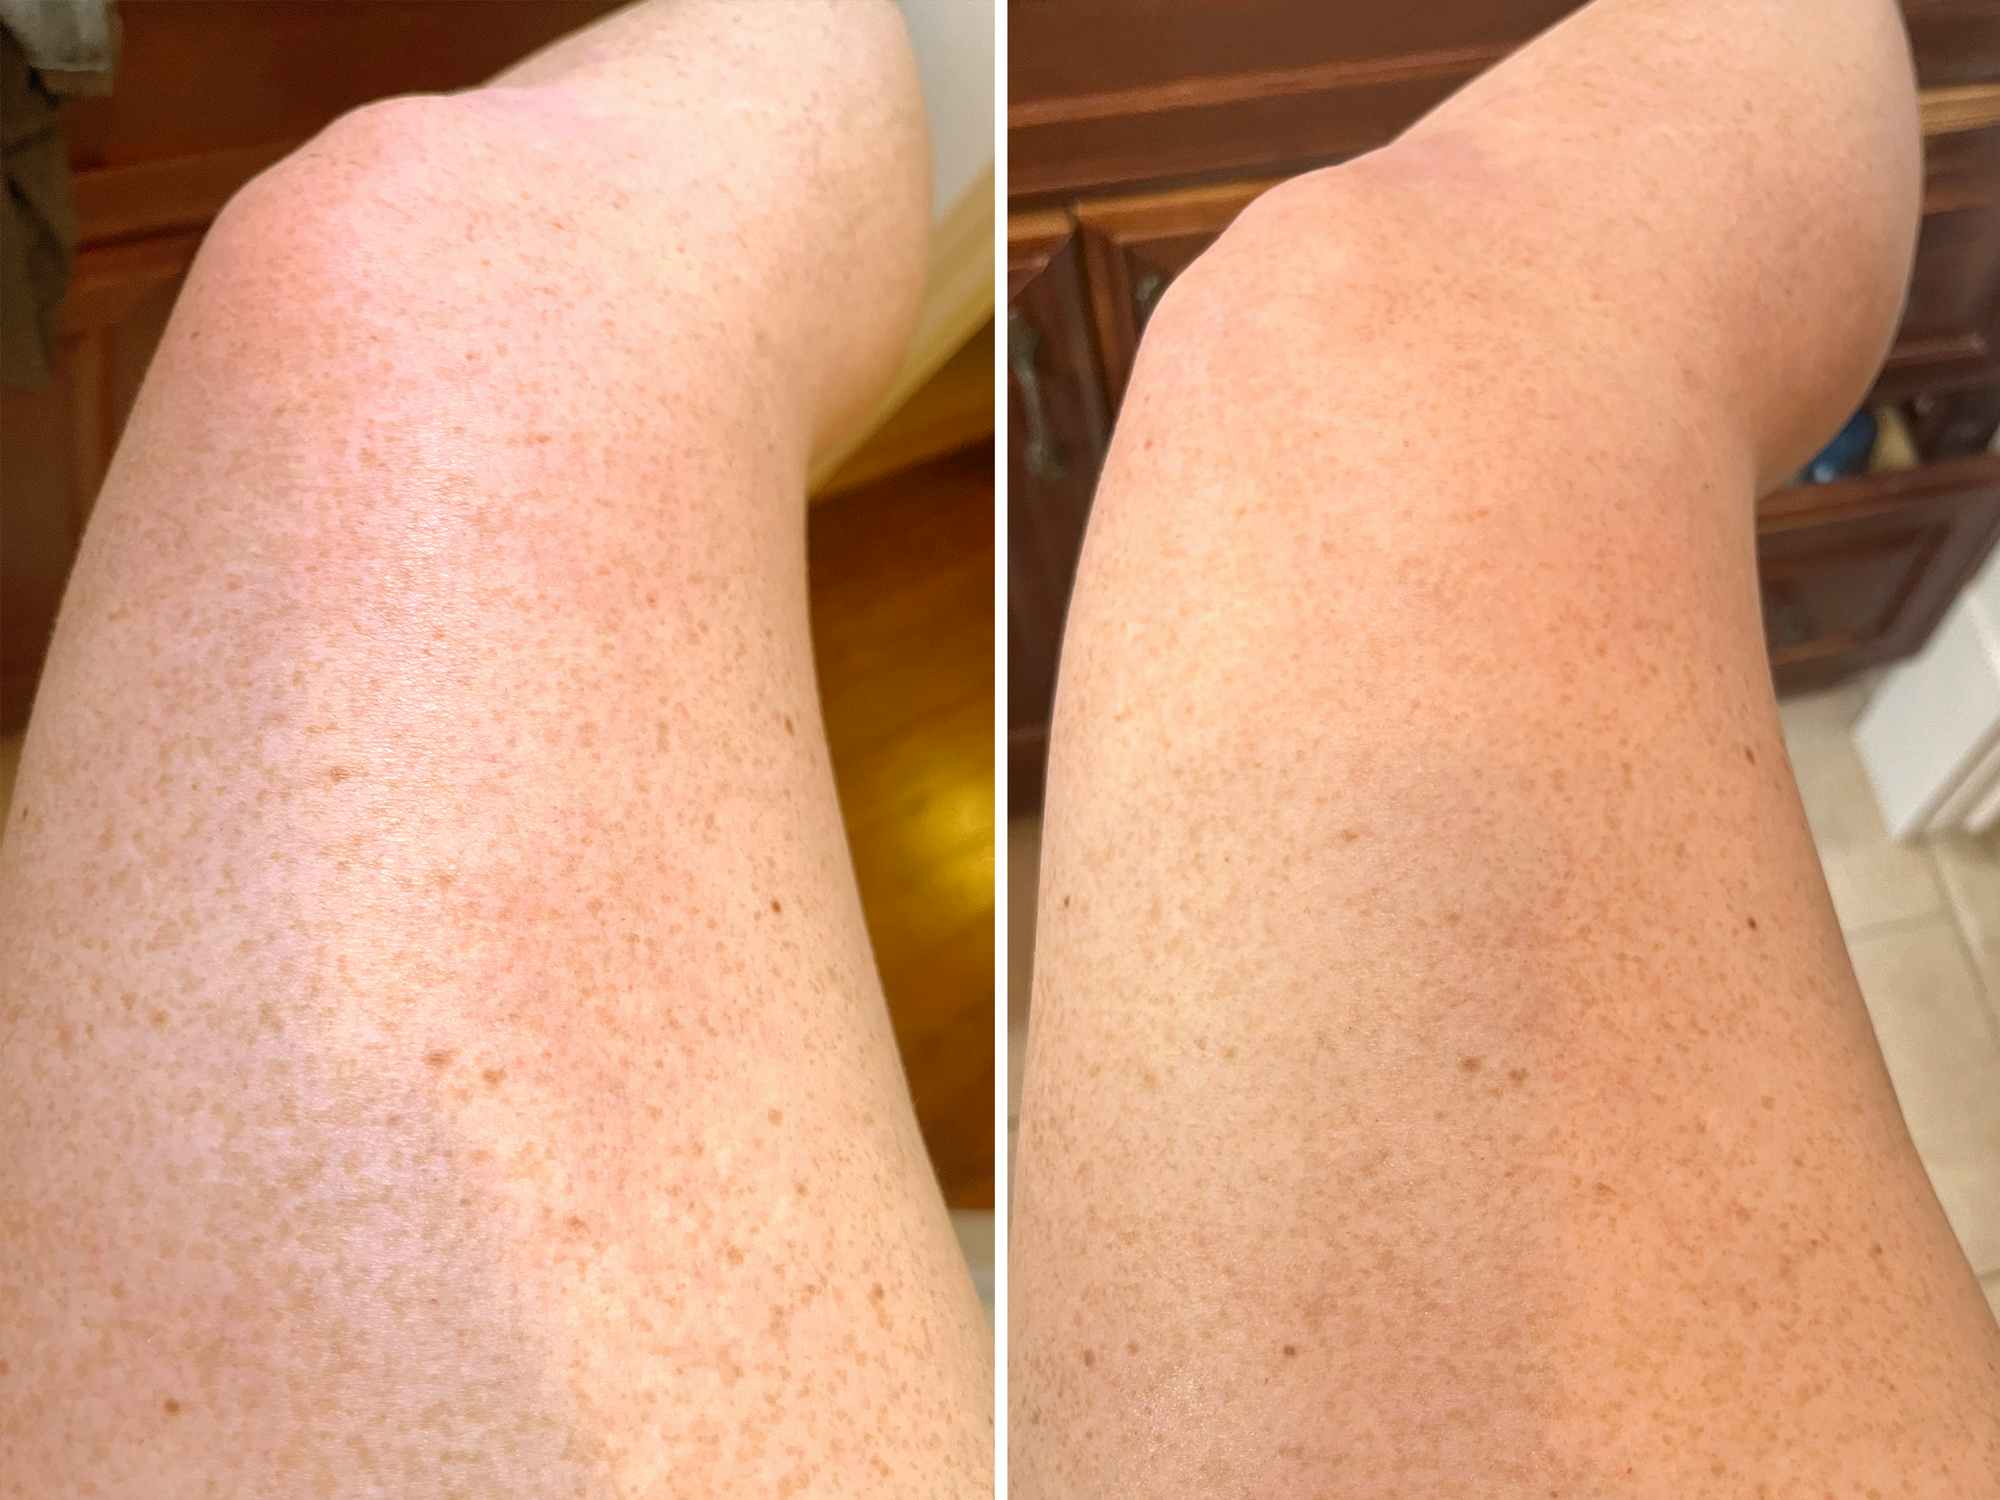 before-and-after of someone's leg after using olay cleansing and firming women's body wash